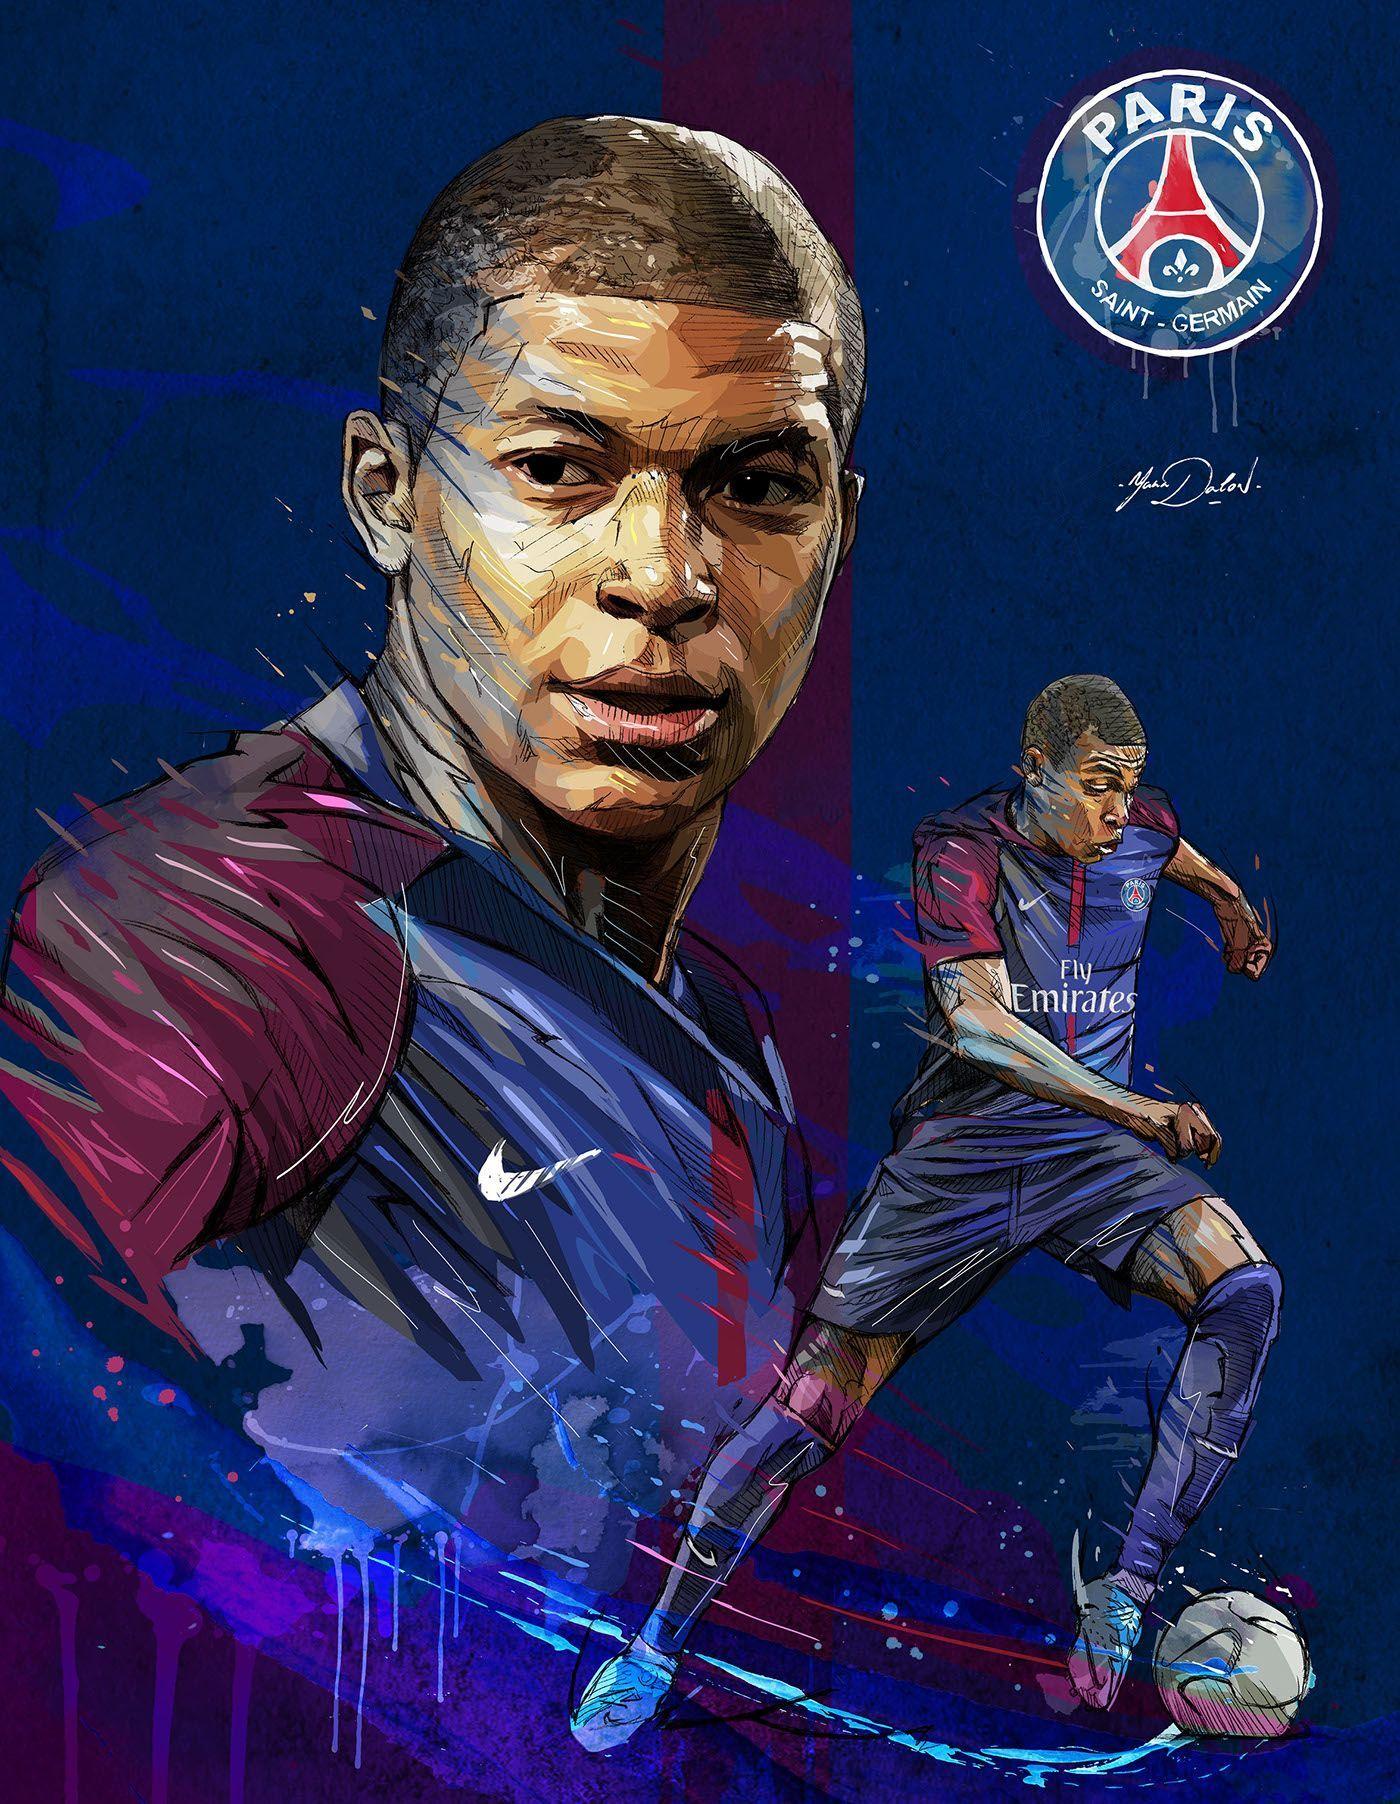 My painting of Kylian Mbappé, young soccer player of the PSG